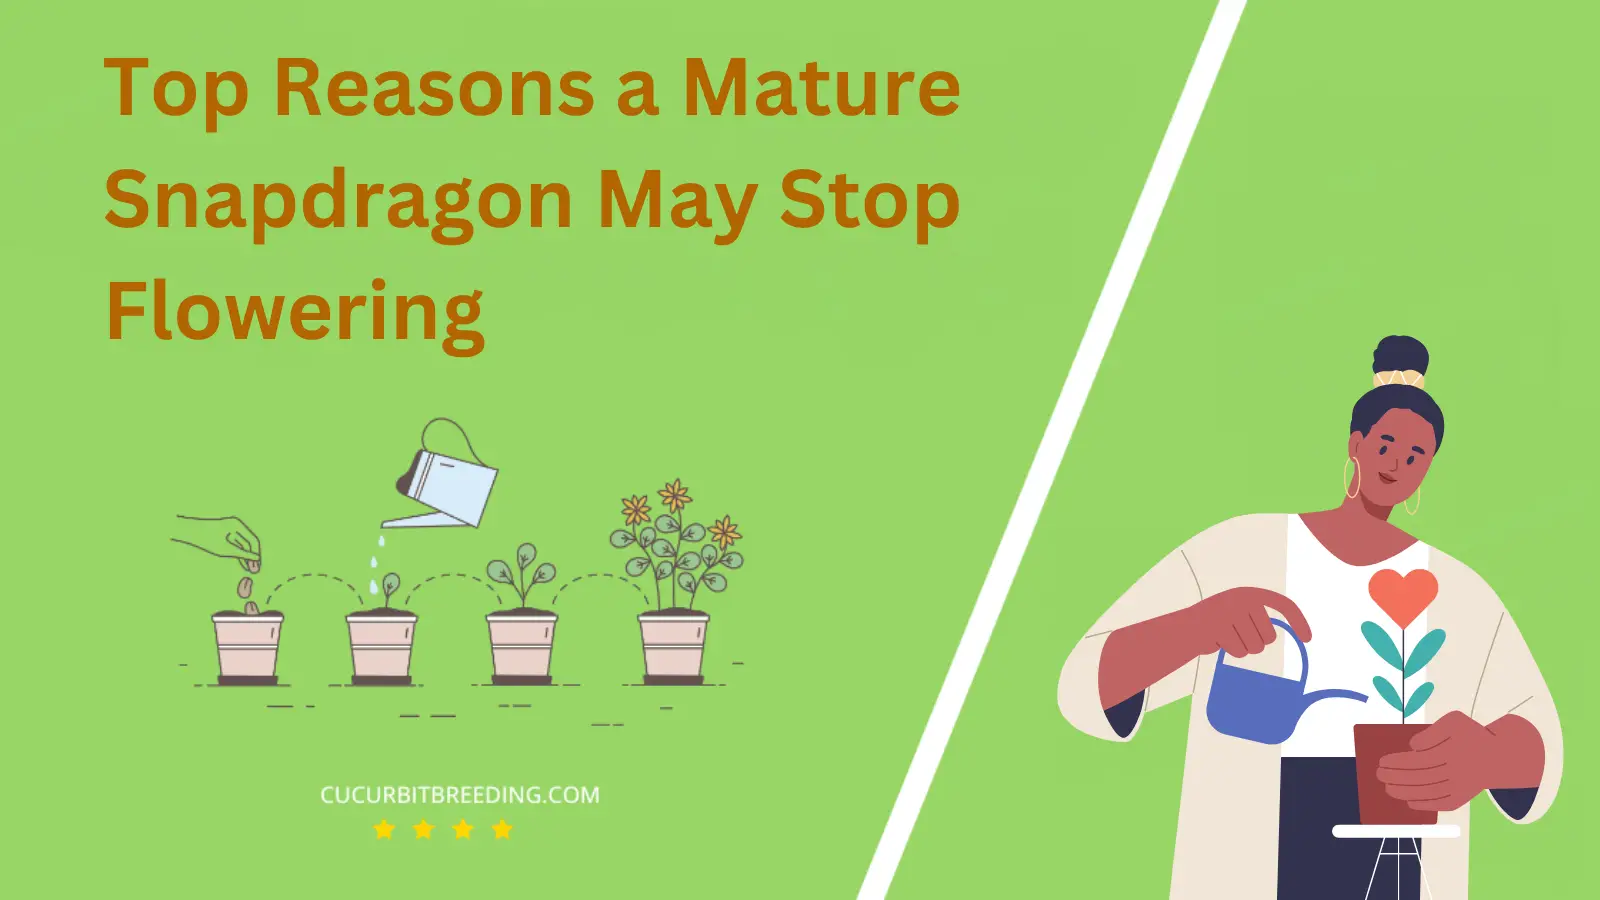 Top Reasons a Mature Snapdragon May Stop Flowering